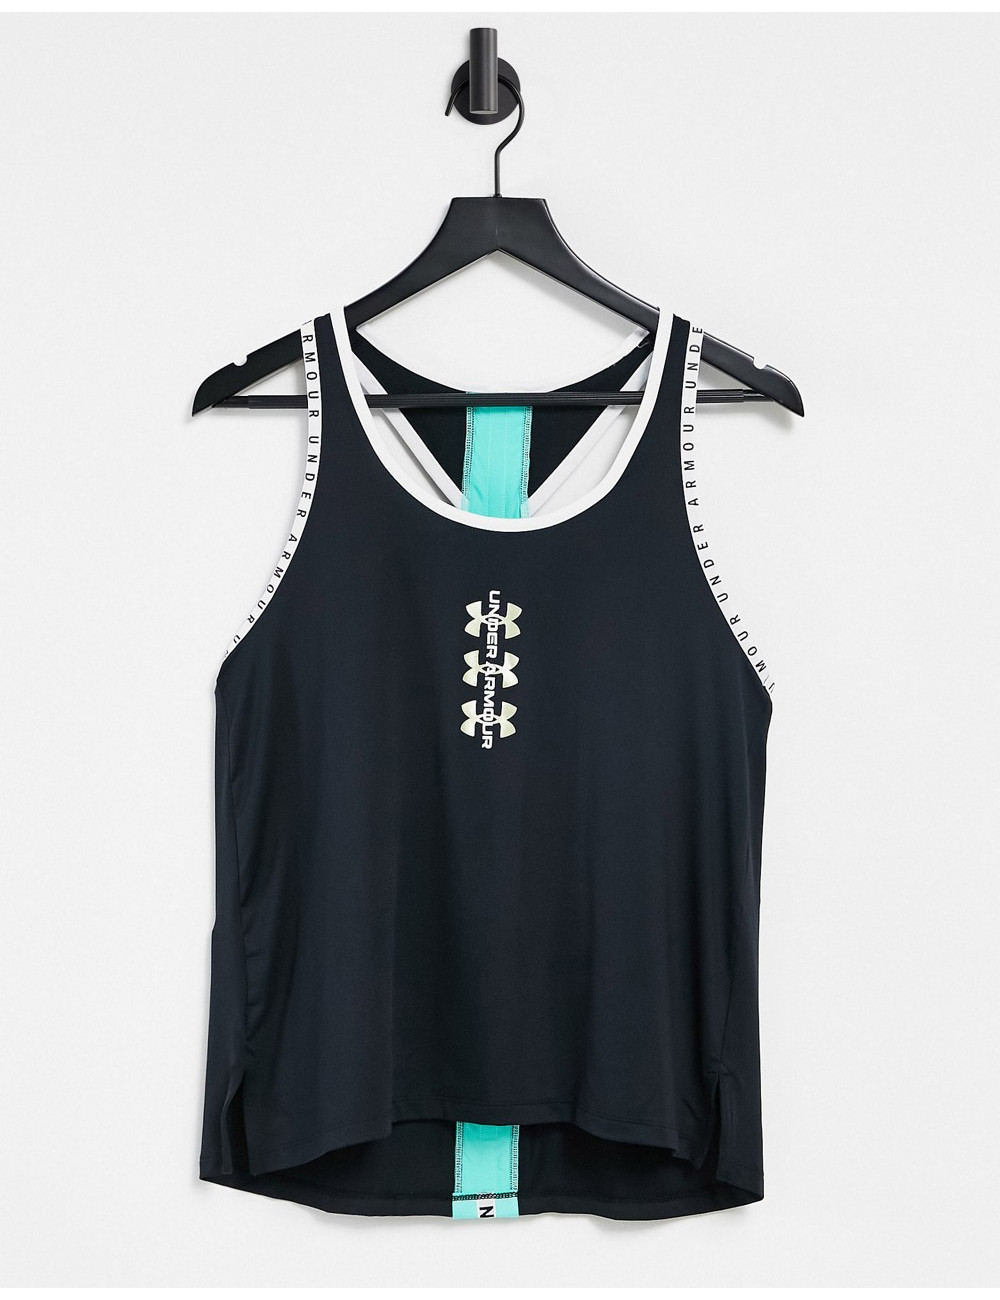 Under Armour knockout tank...